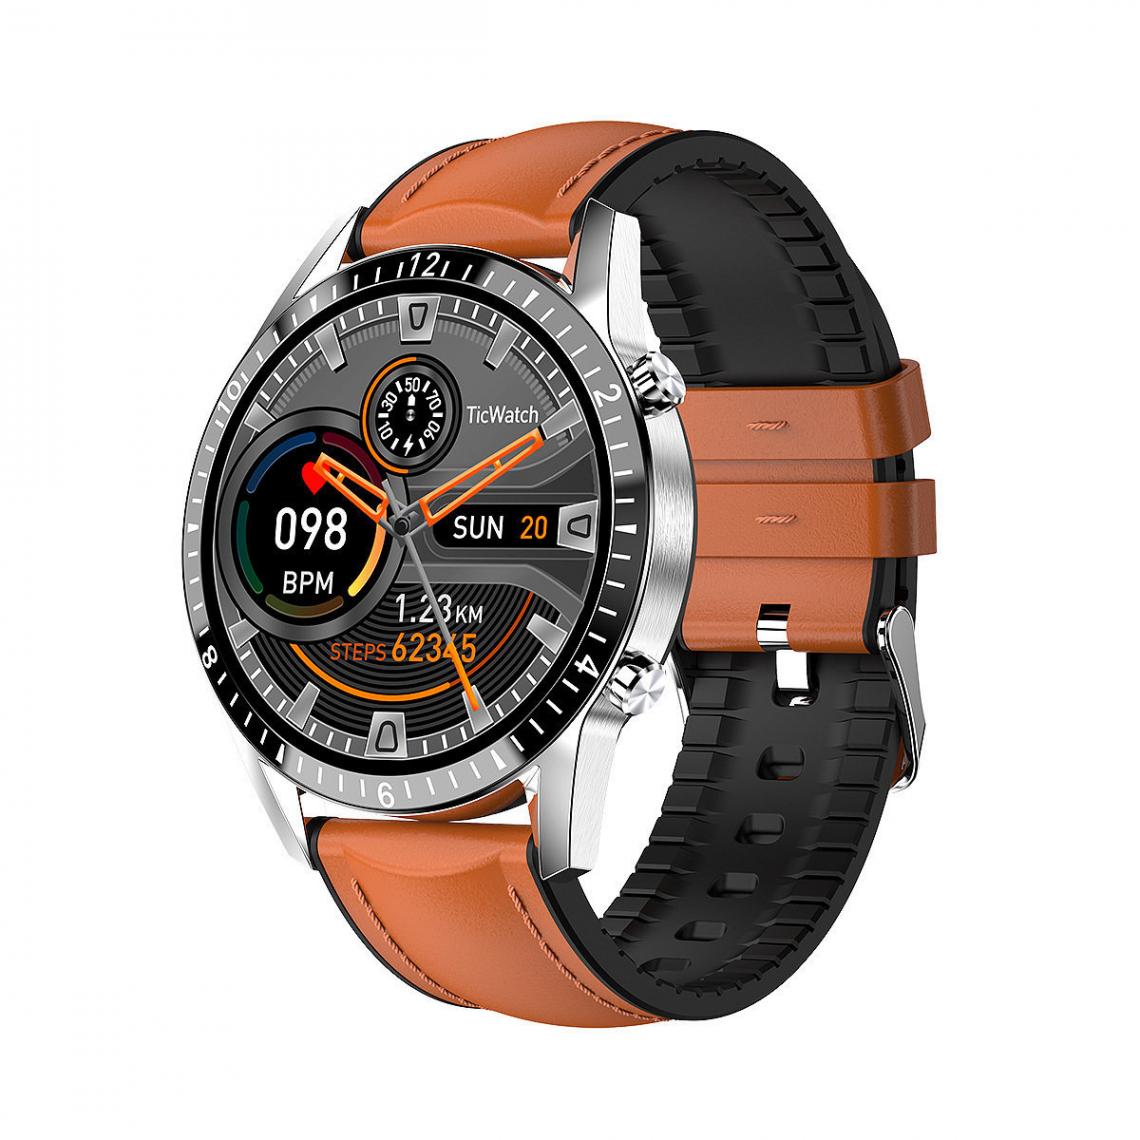 Chronotech Montres - Men's Connected Watch Smartwatch with Waterproof IP67 / Watch Phone / Sleep / Fitness Tracker / Pedometer, 10 Sport Modes for iOS / Android(Brown) - Montre connectée